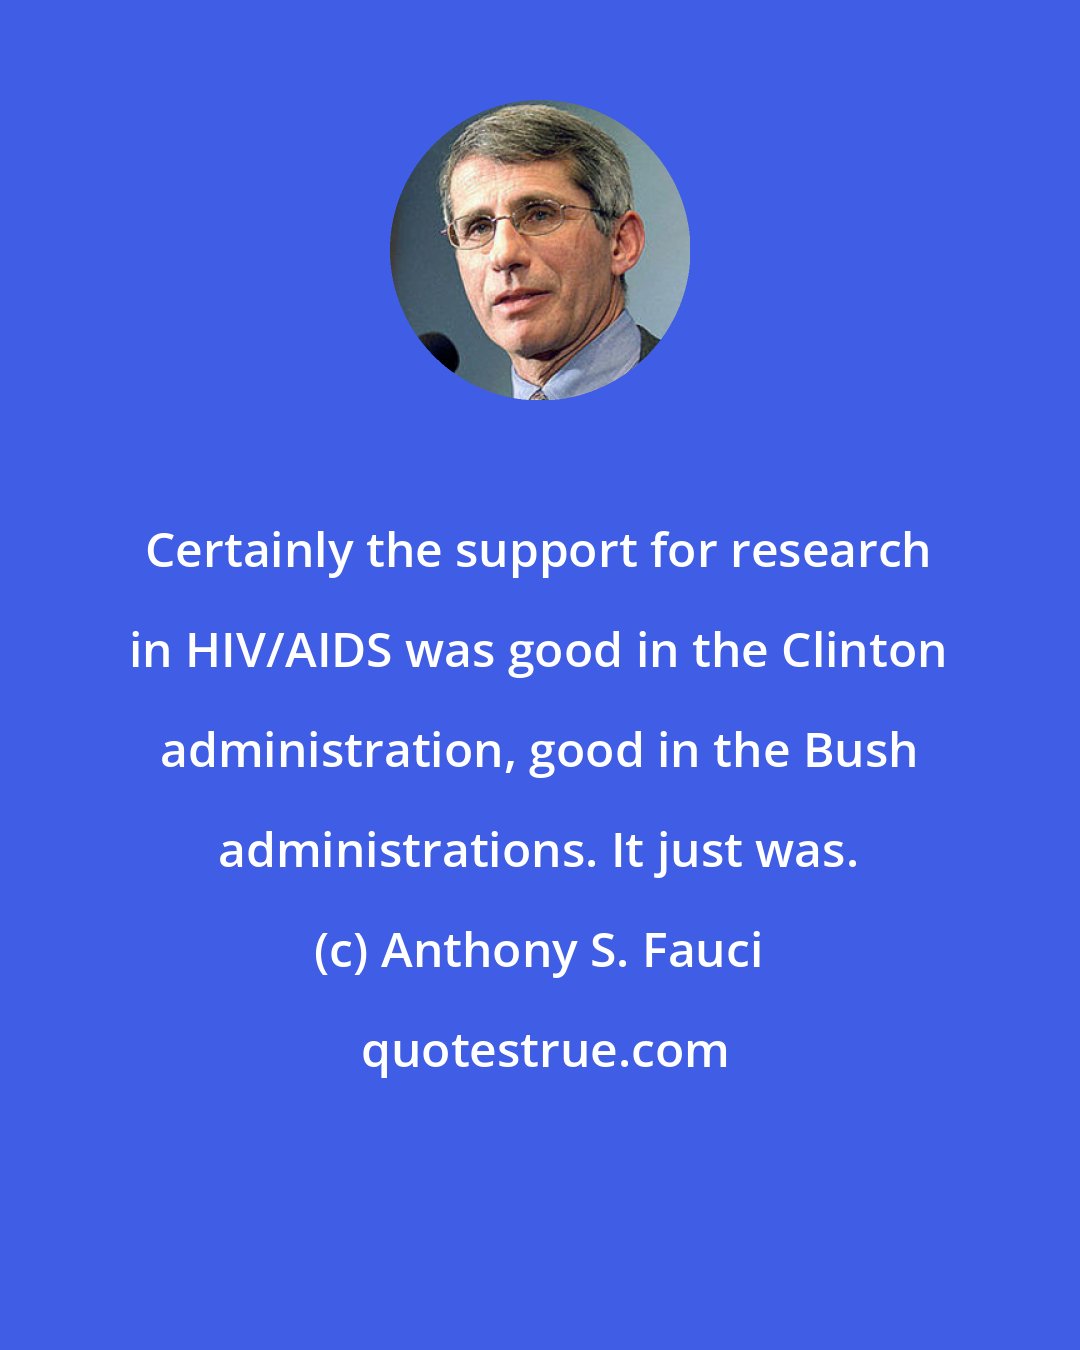 Anthony S. Fauci: Certainly the support for research in HIV/AIDS was good in the Clinton administration, good in the Bush administrations. It just was.